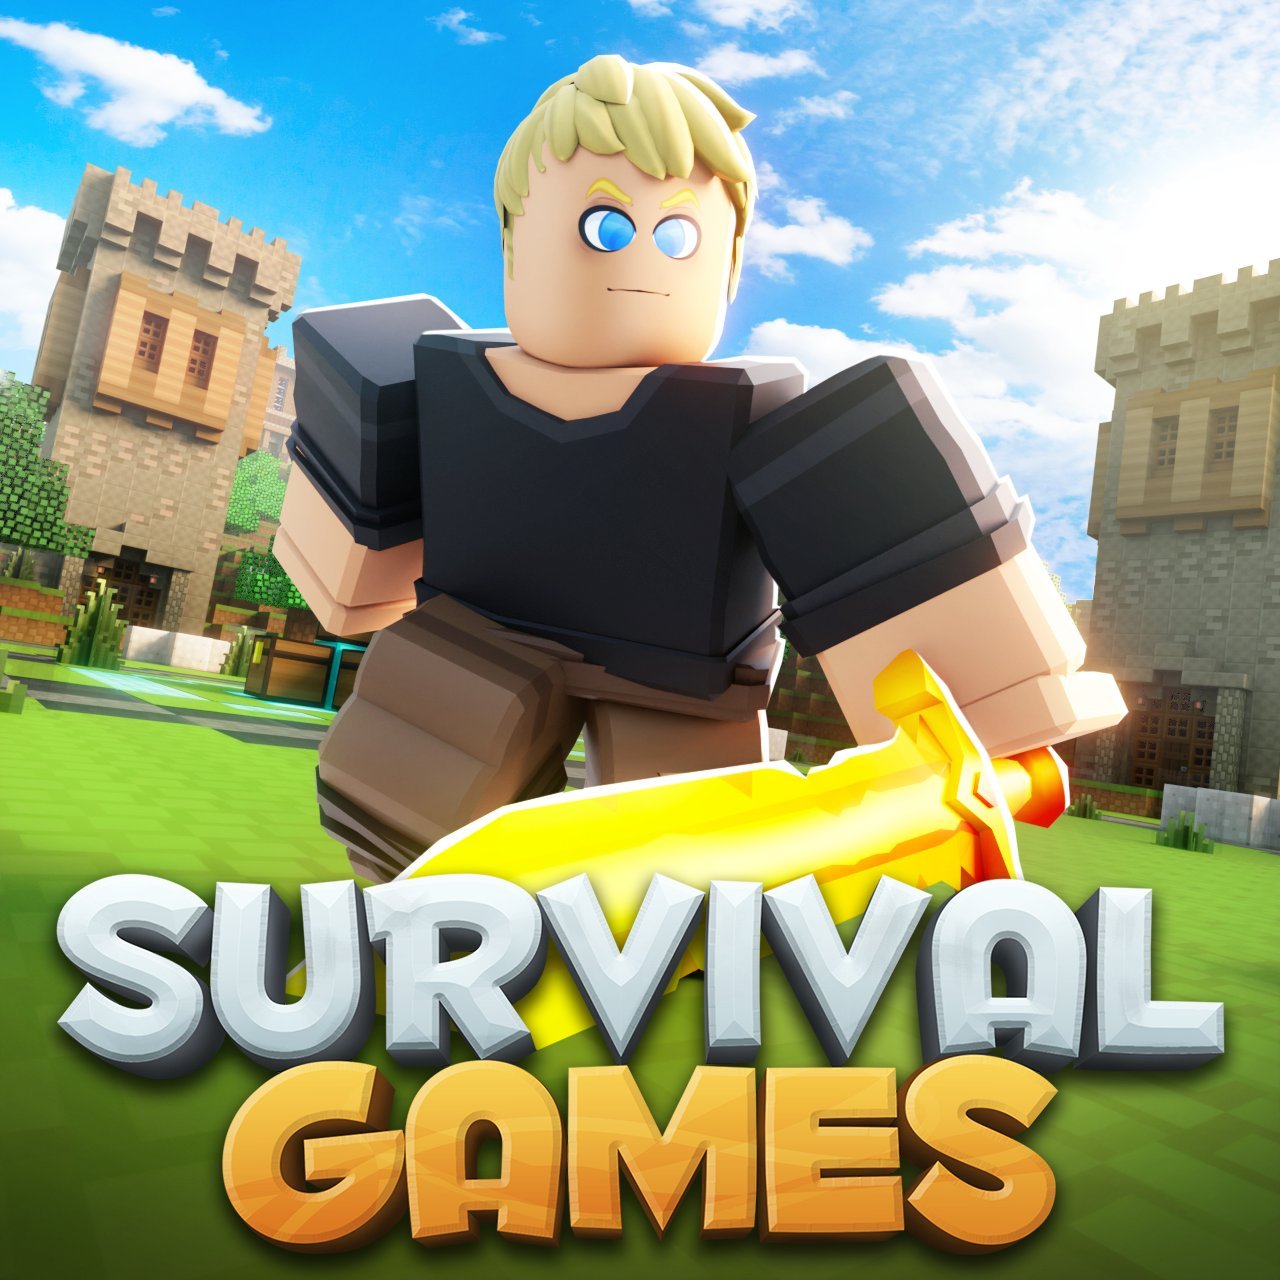 Roblox Survival Games on X: Survival Games is now live! We hope